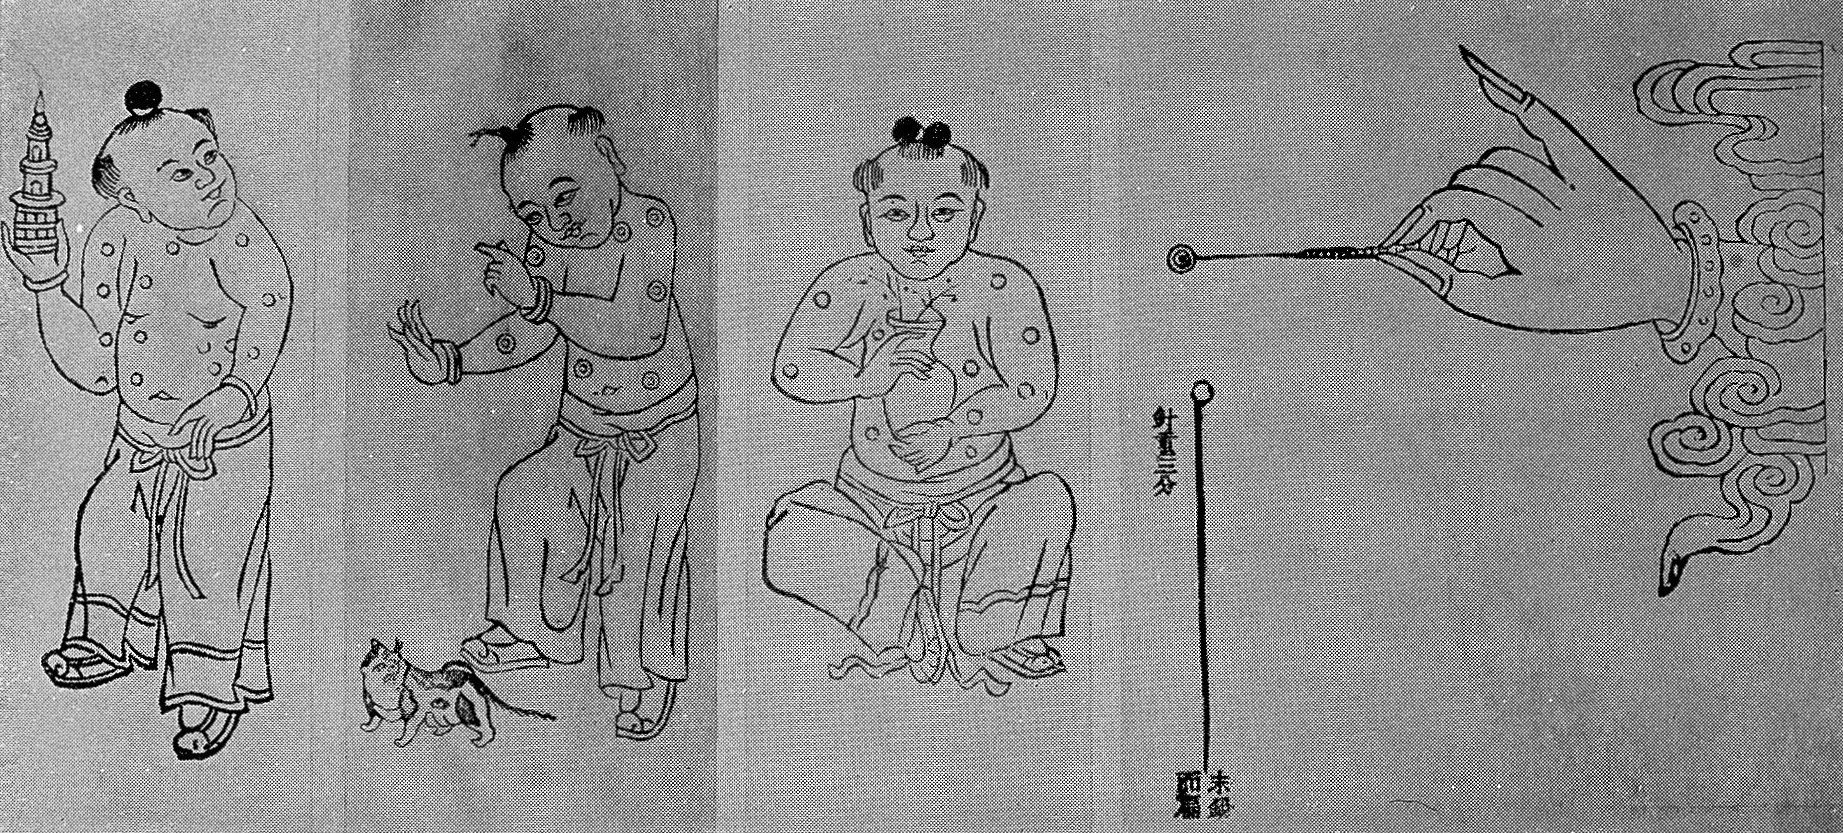 Pre-18th century Chinese vaccination method.